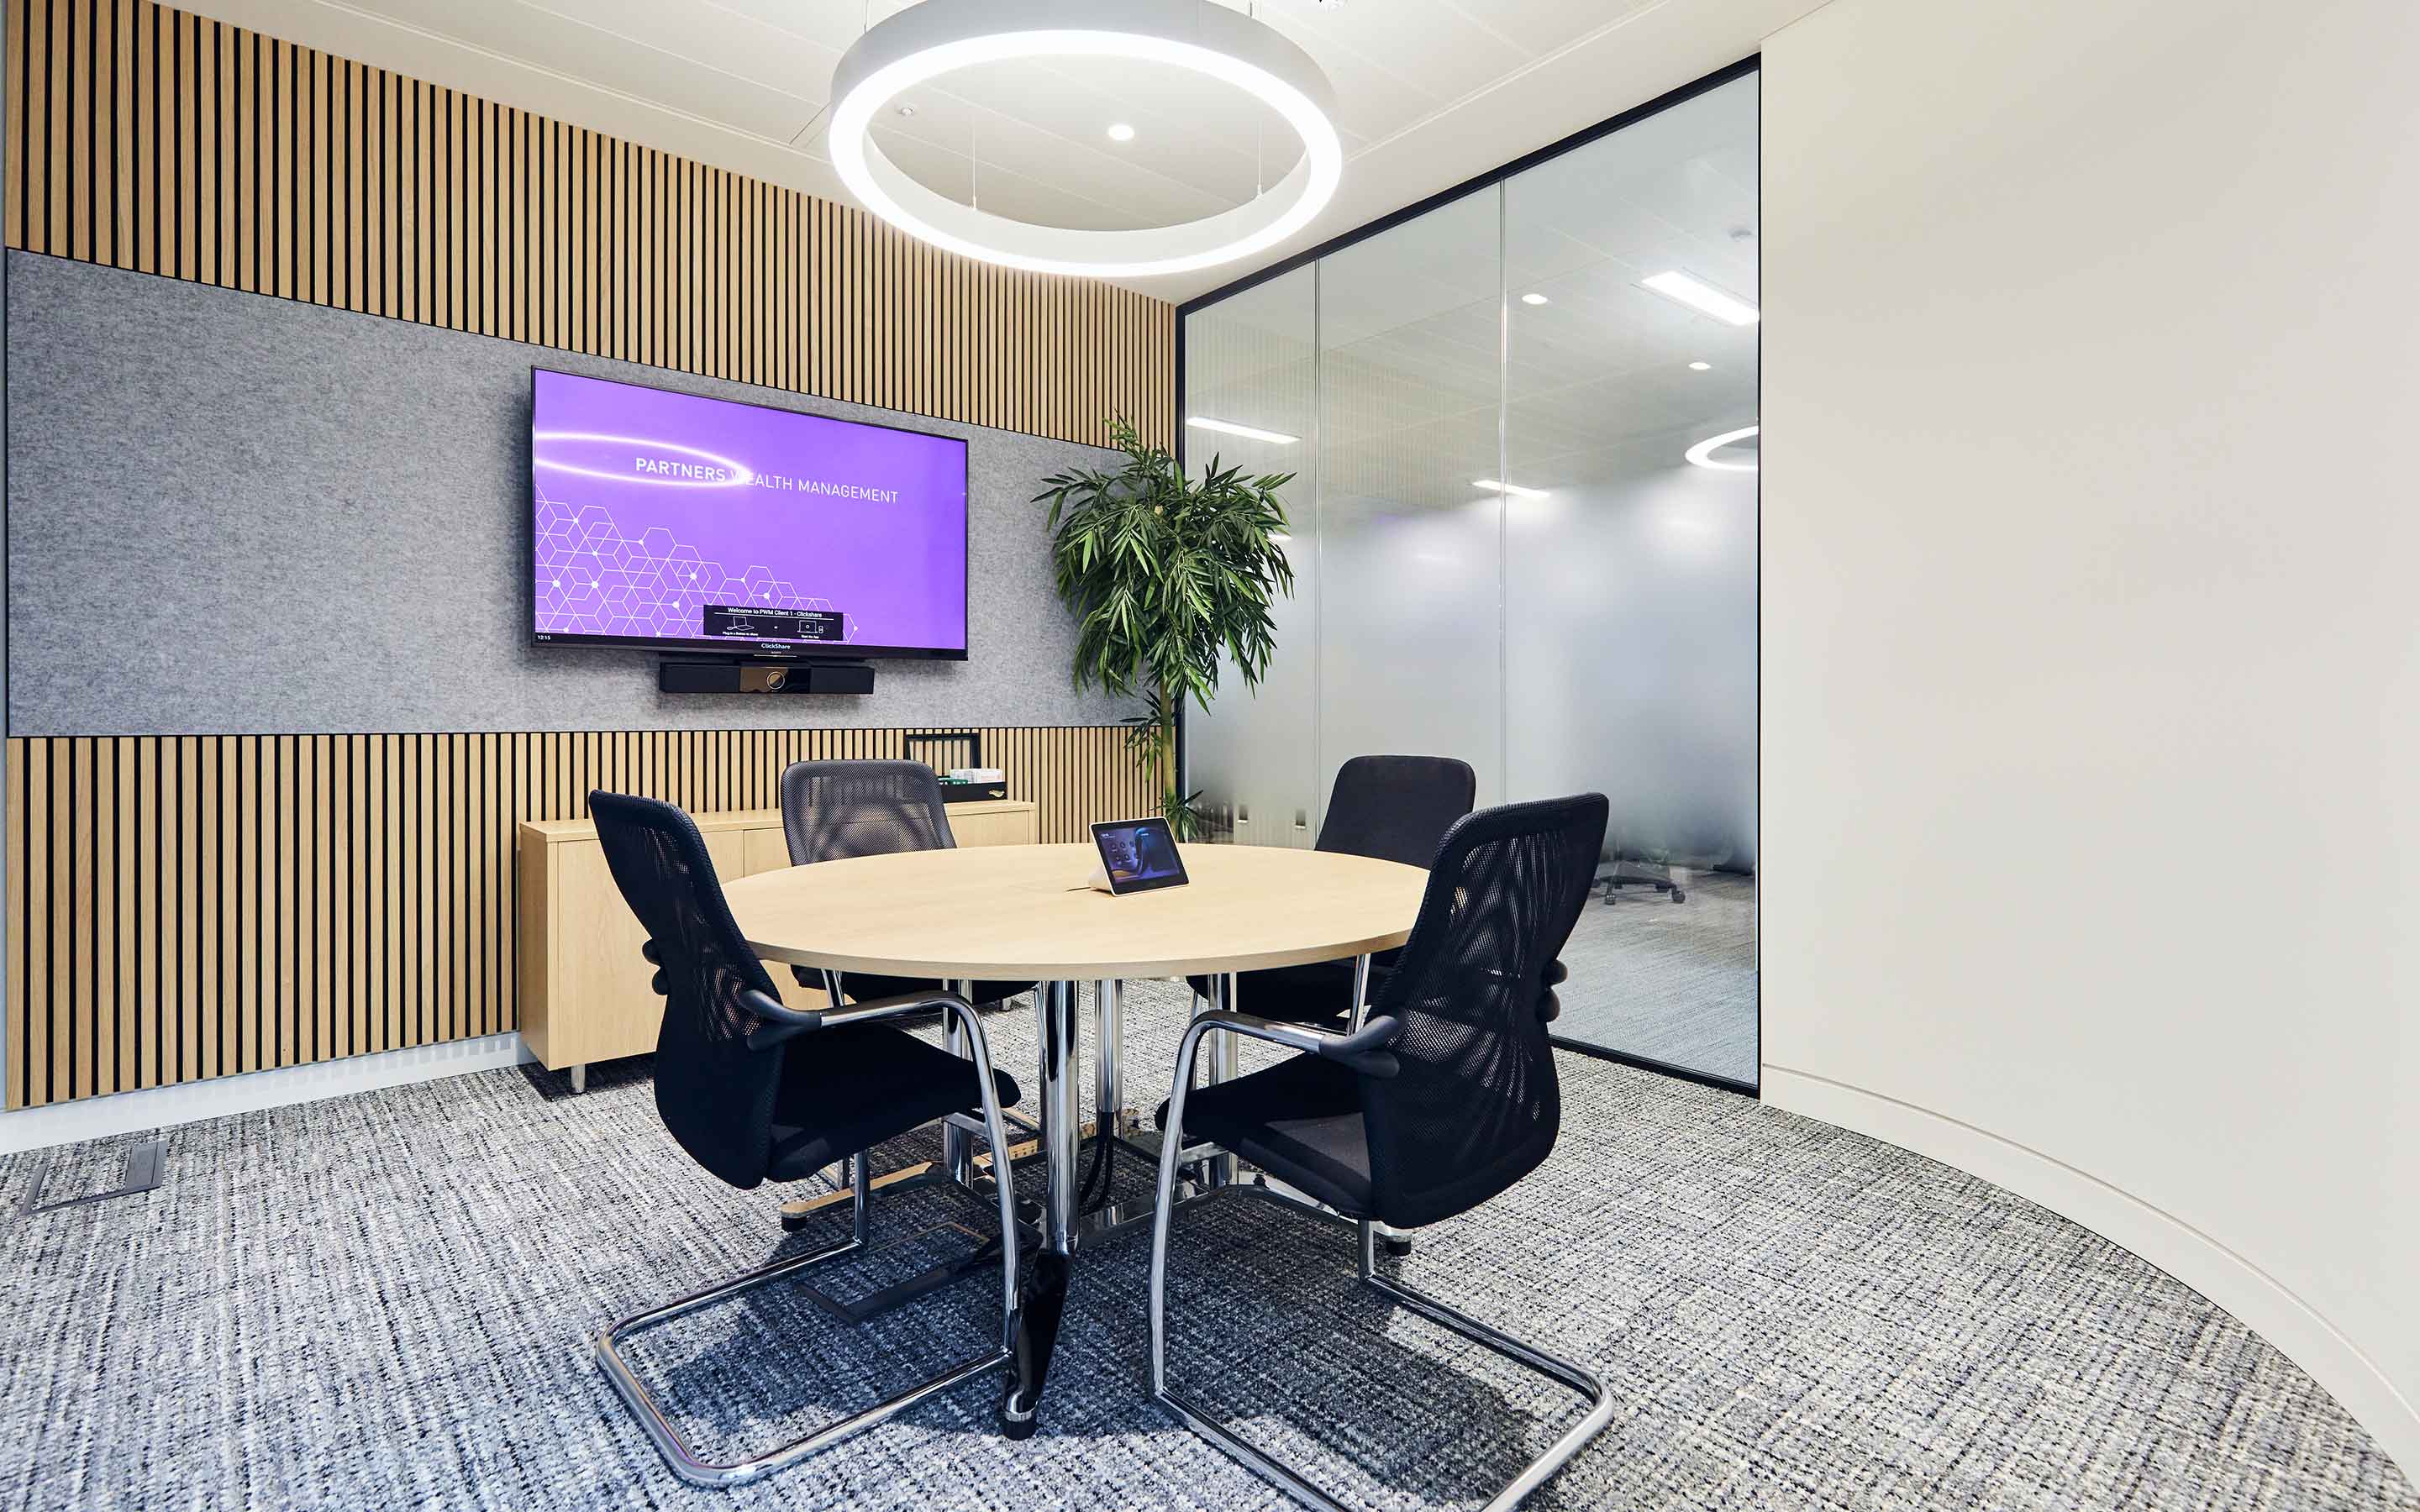 A meeting room with acoustic wall panelling, grey carpet, round meeting table and chairs, and a curved wall